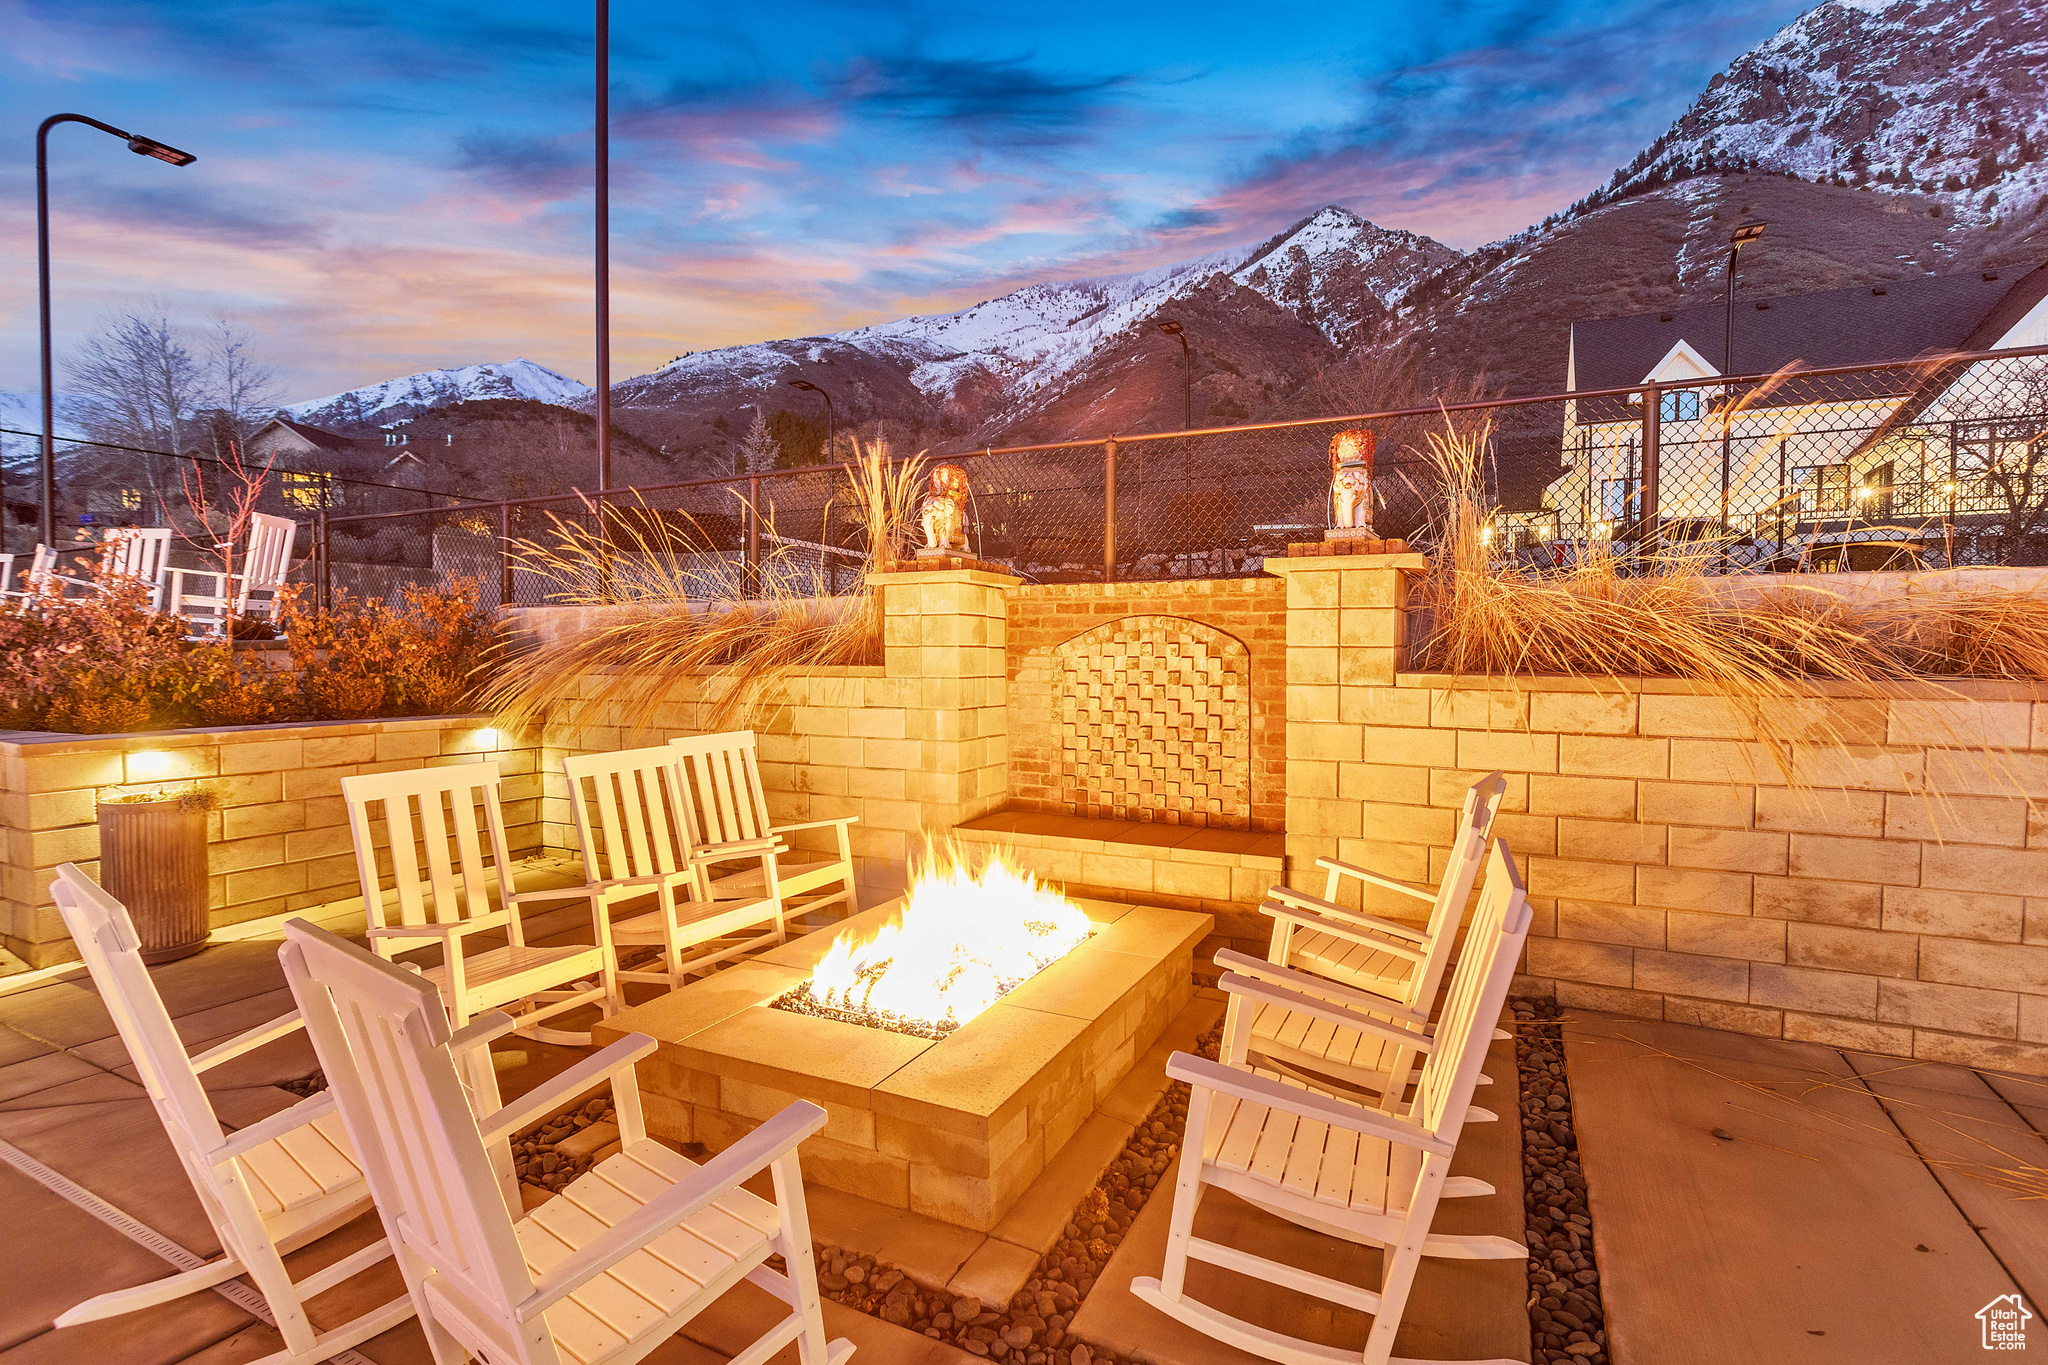 Patio terrace at dusk with a mountain view and an outdoor fire pit